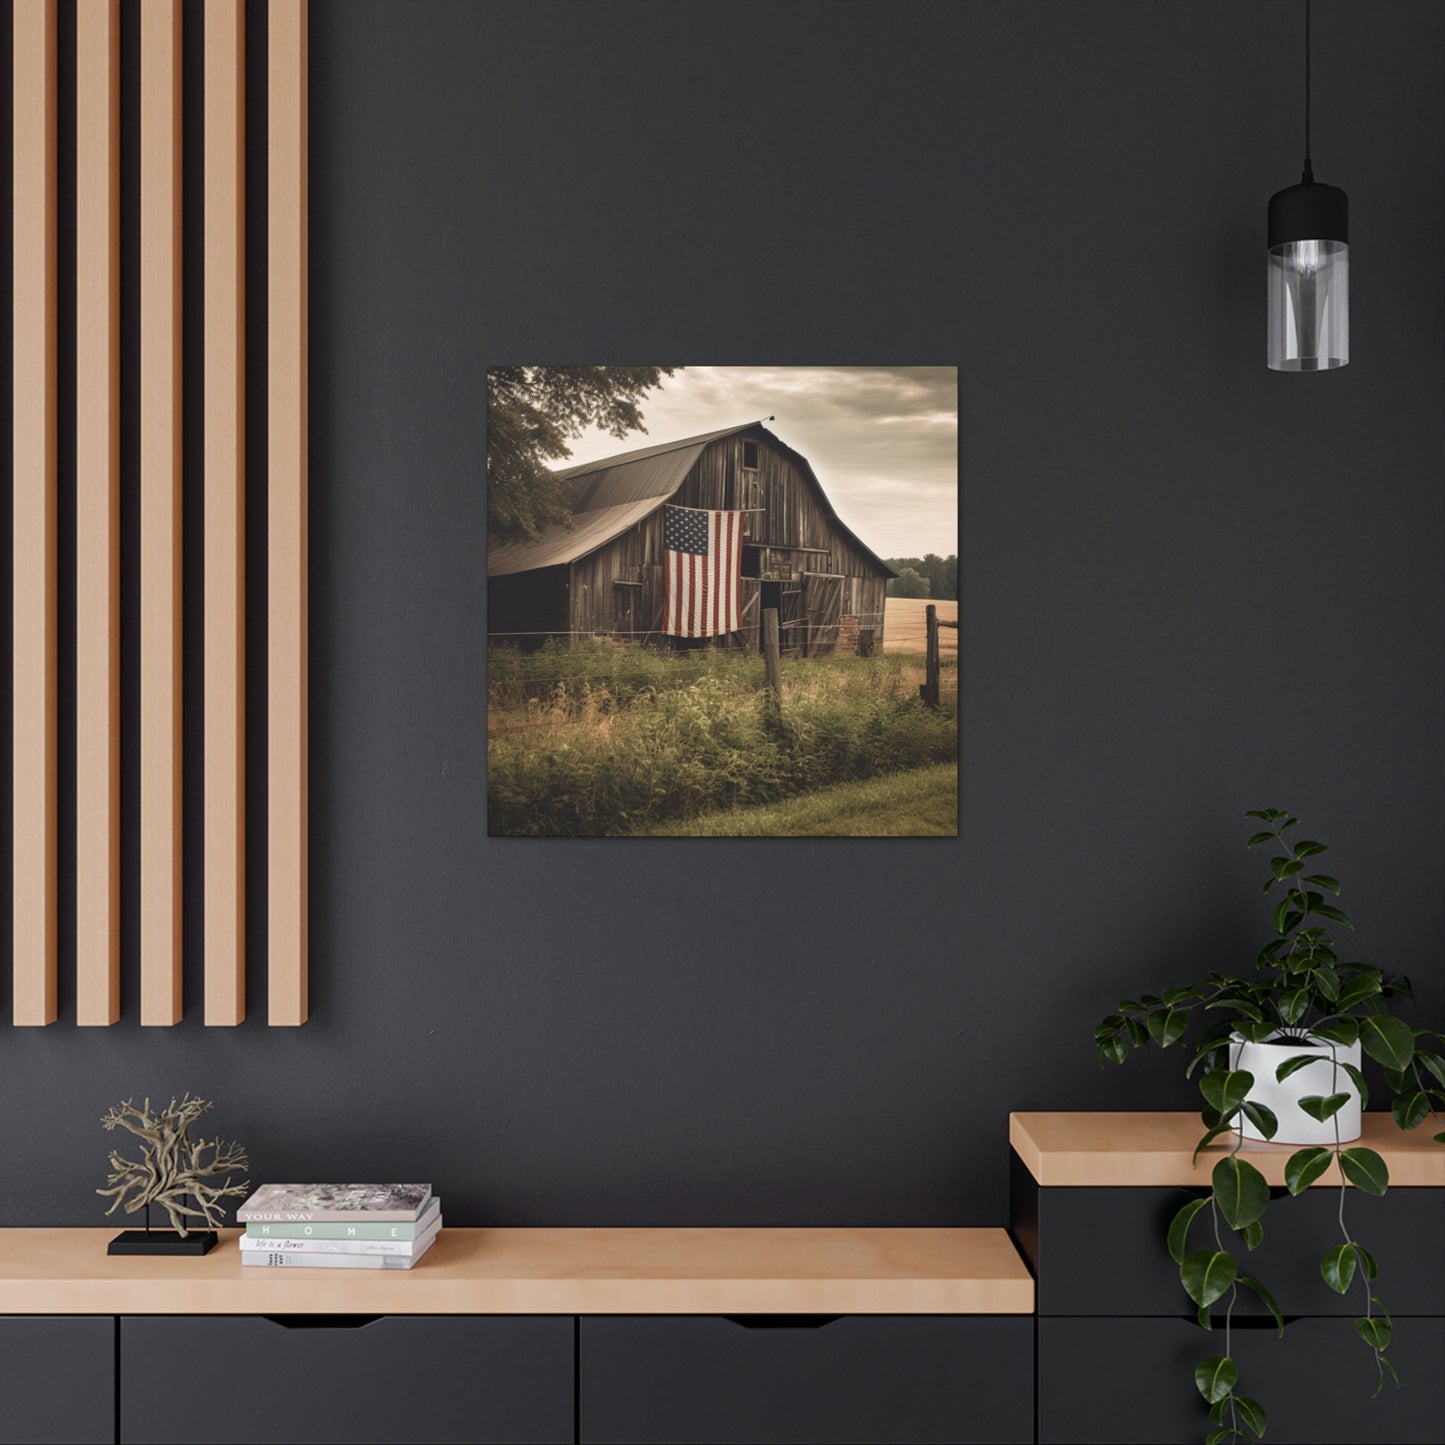 "American Farm" Wall Art - Weave Got Gifts - Unique Gifts You Won’t Find Anywhere Else!